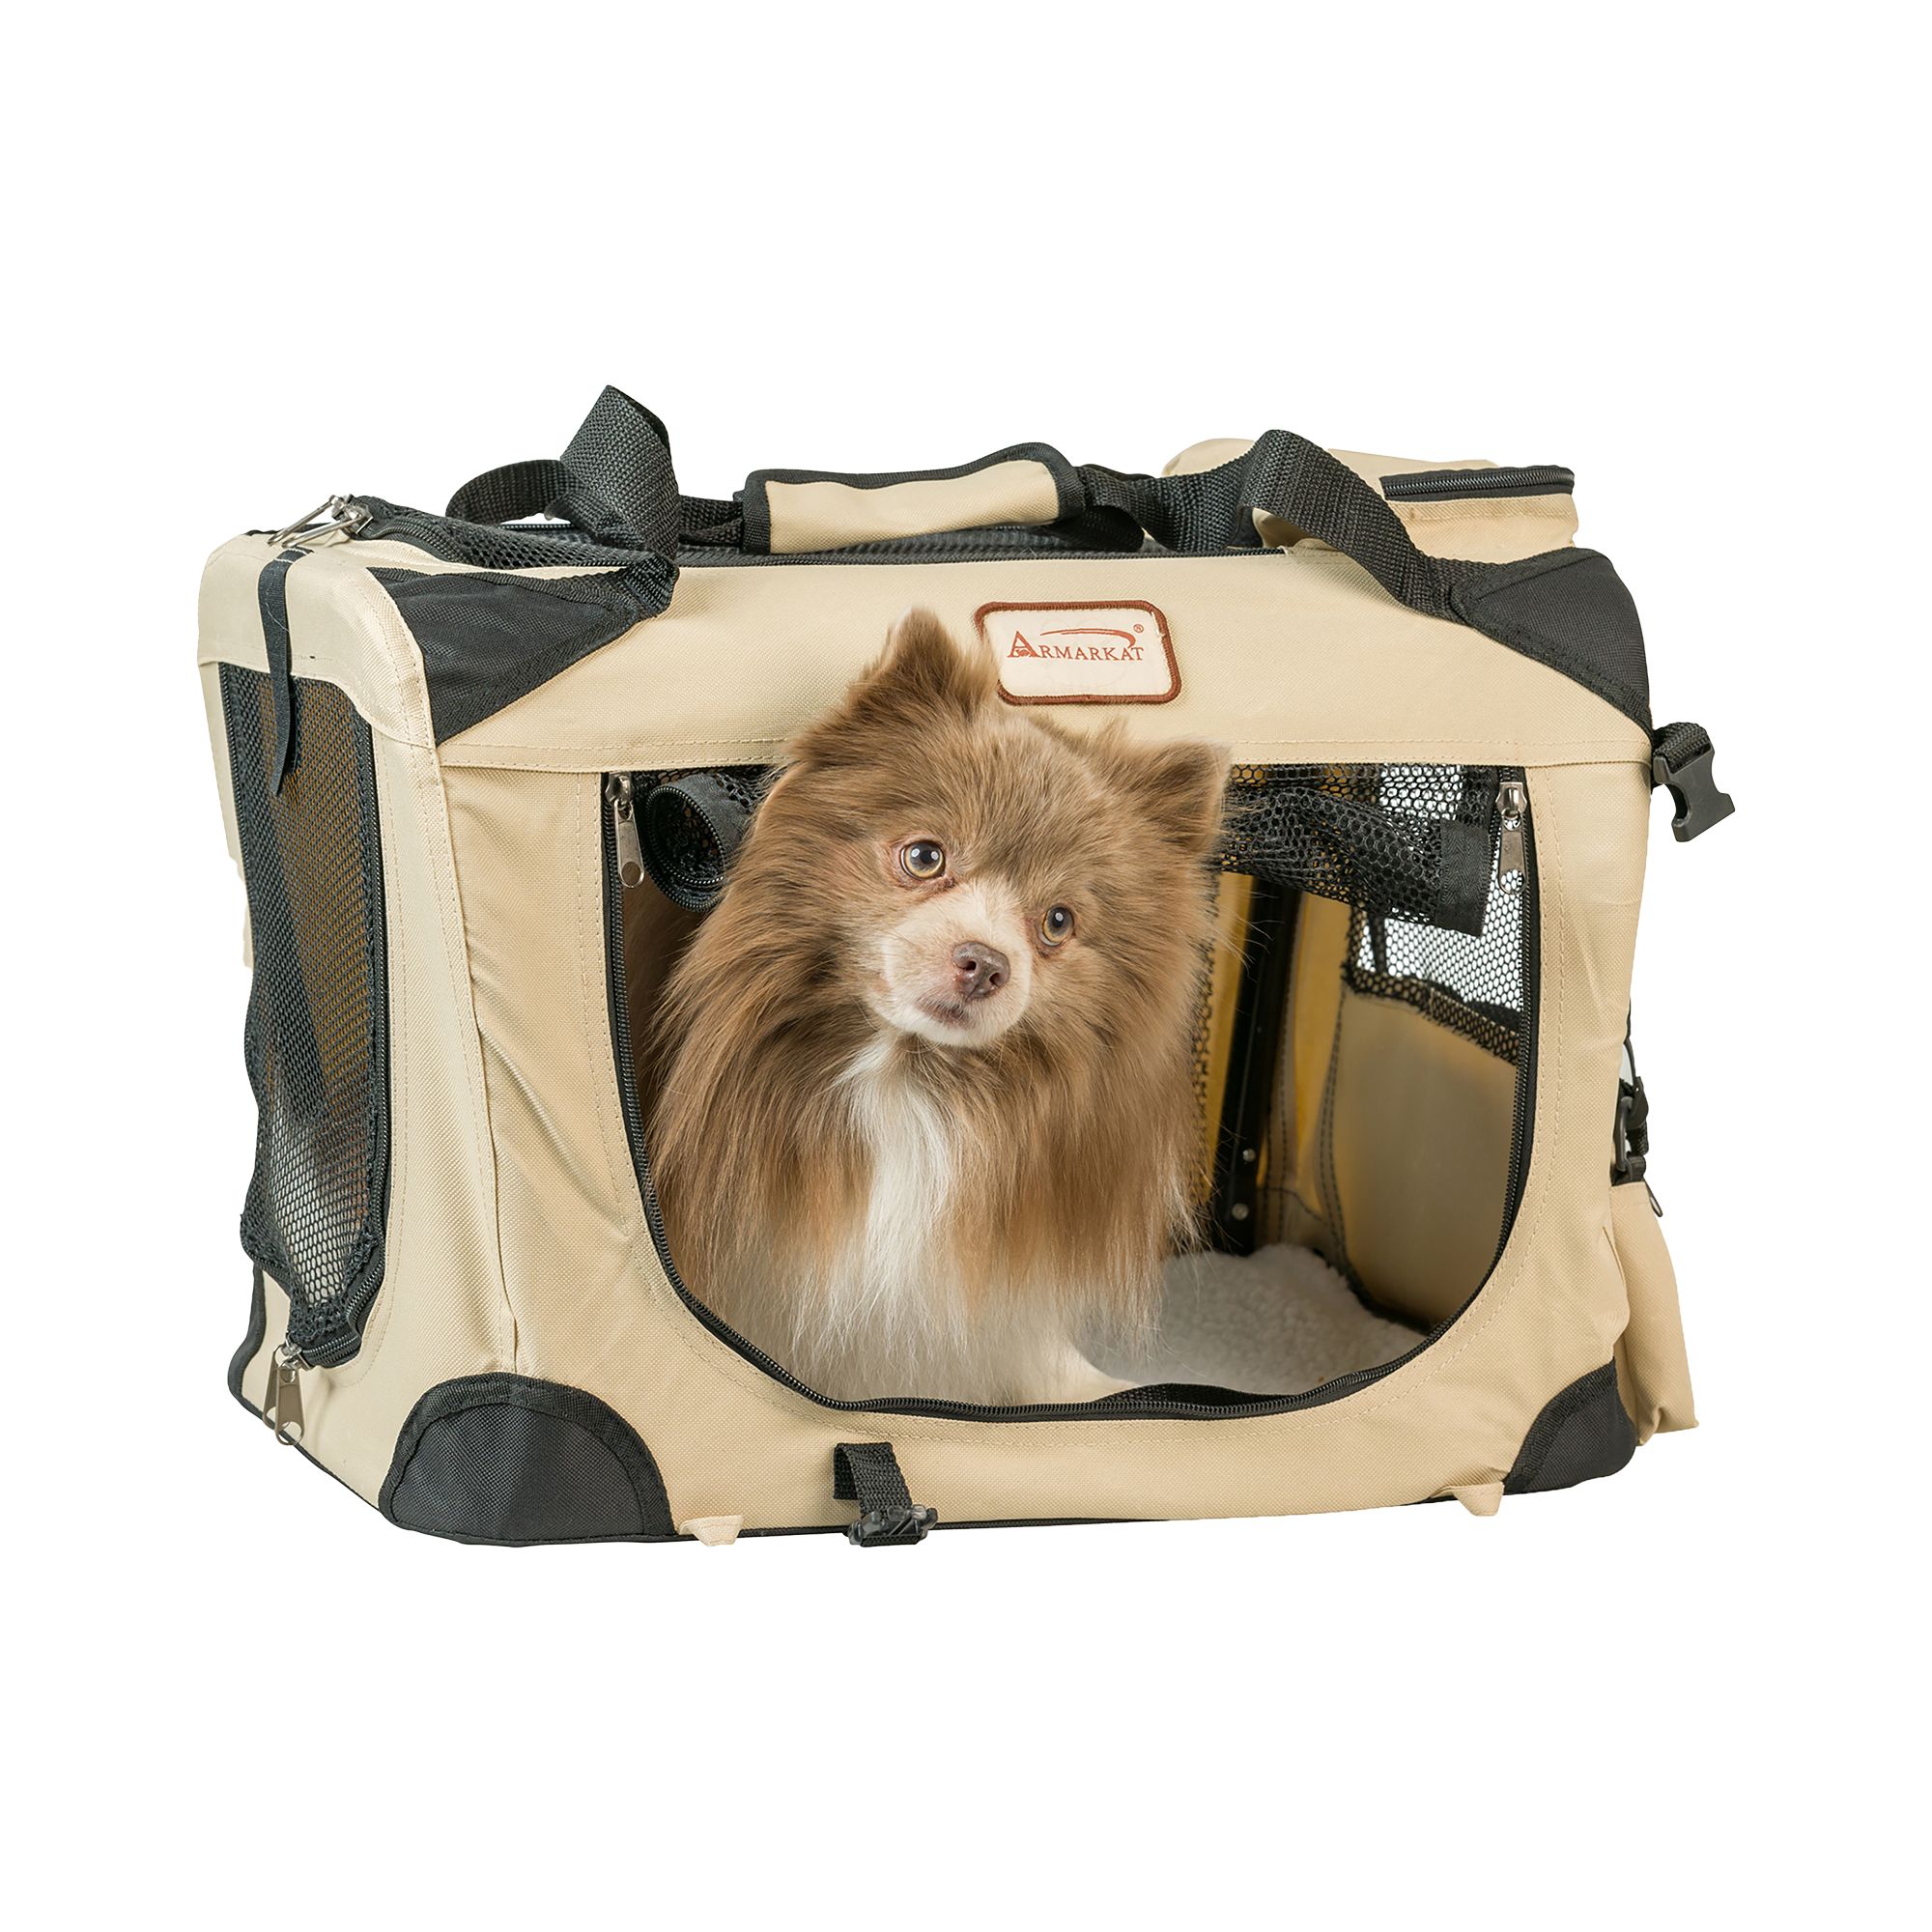 Armarkat Foldable Crate for Dog or Cat